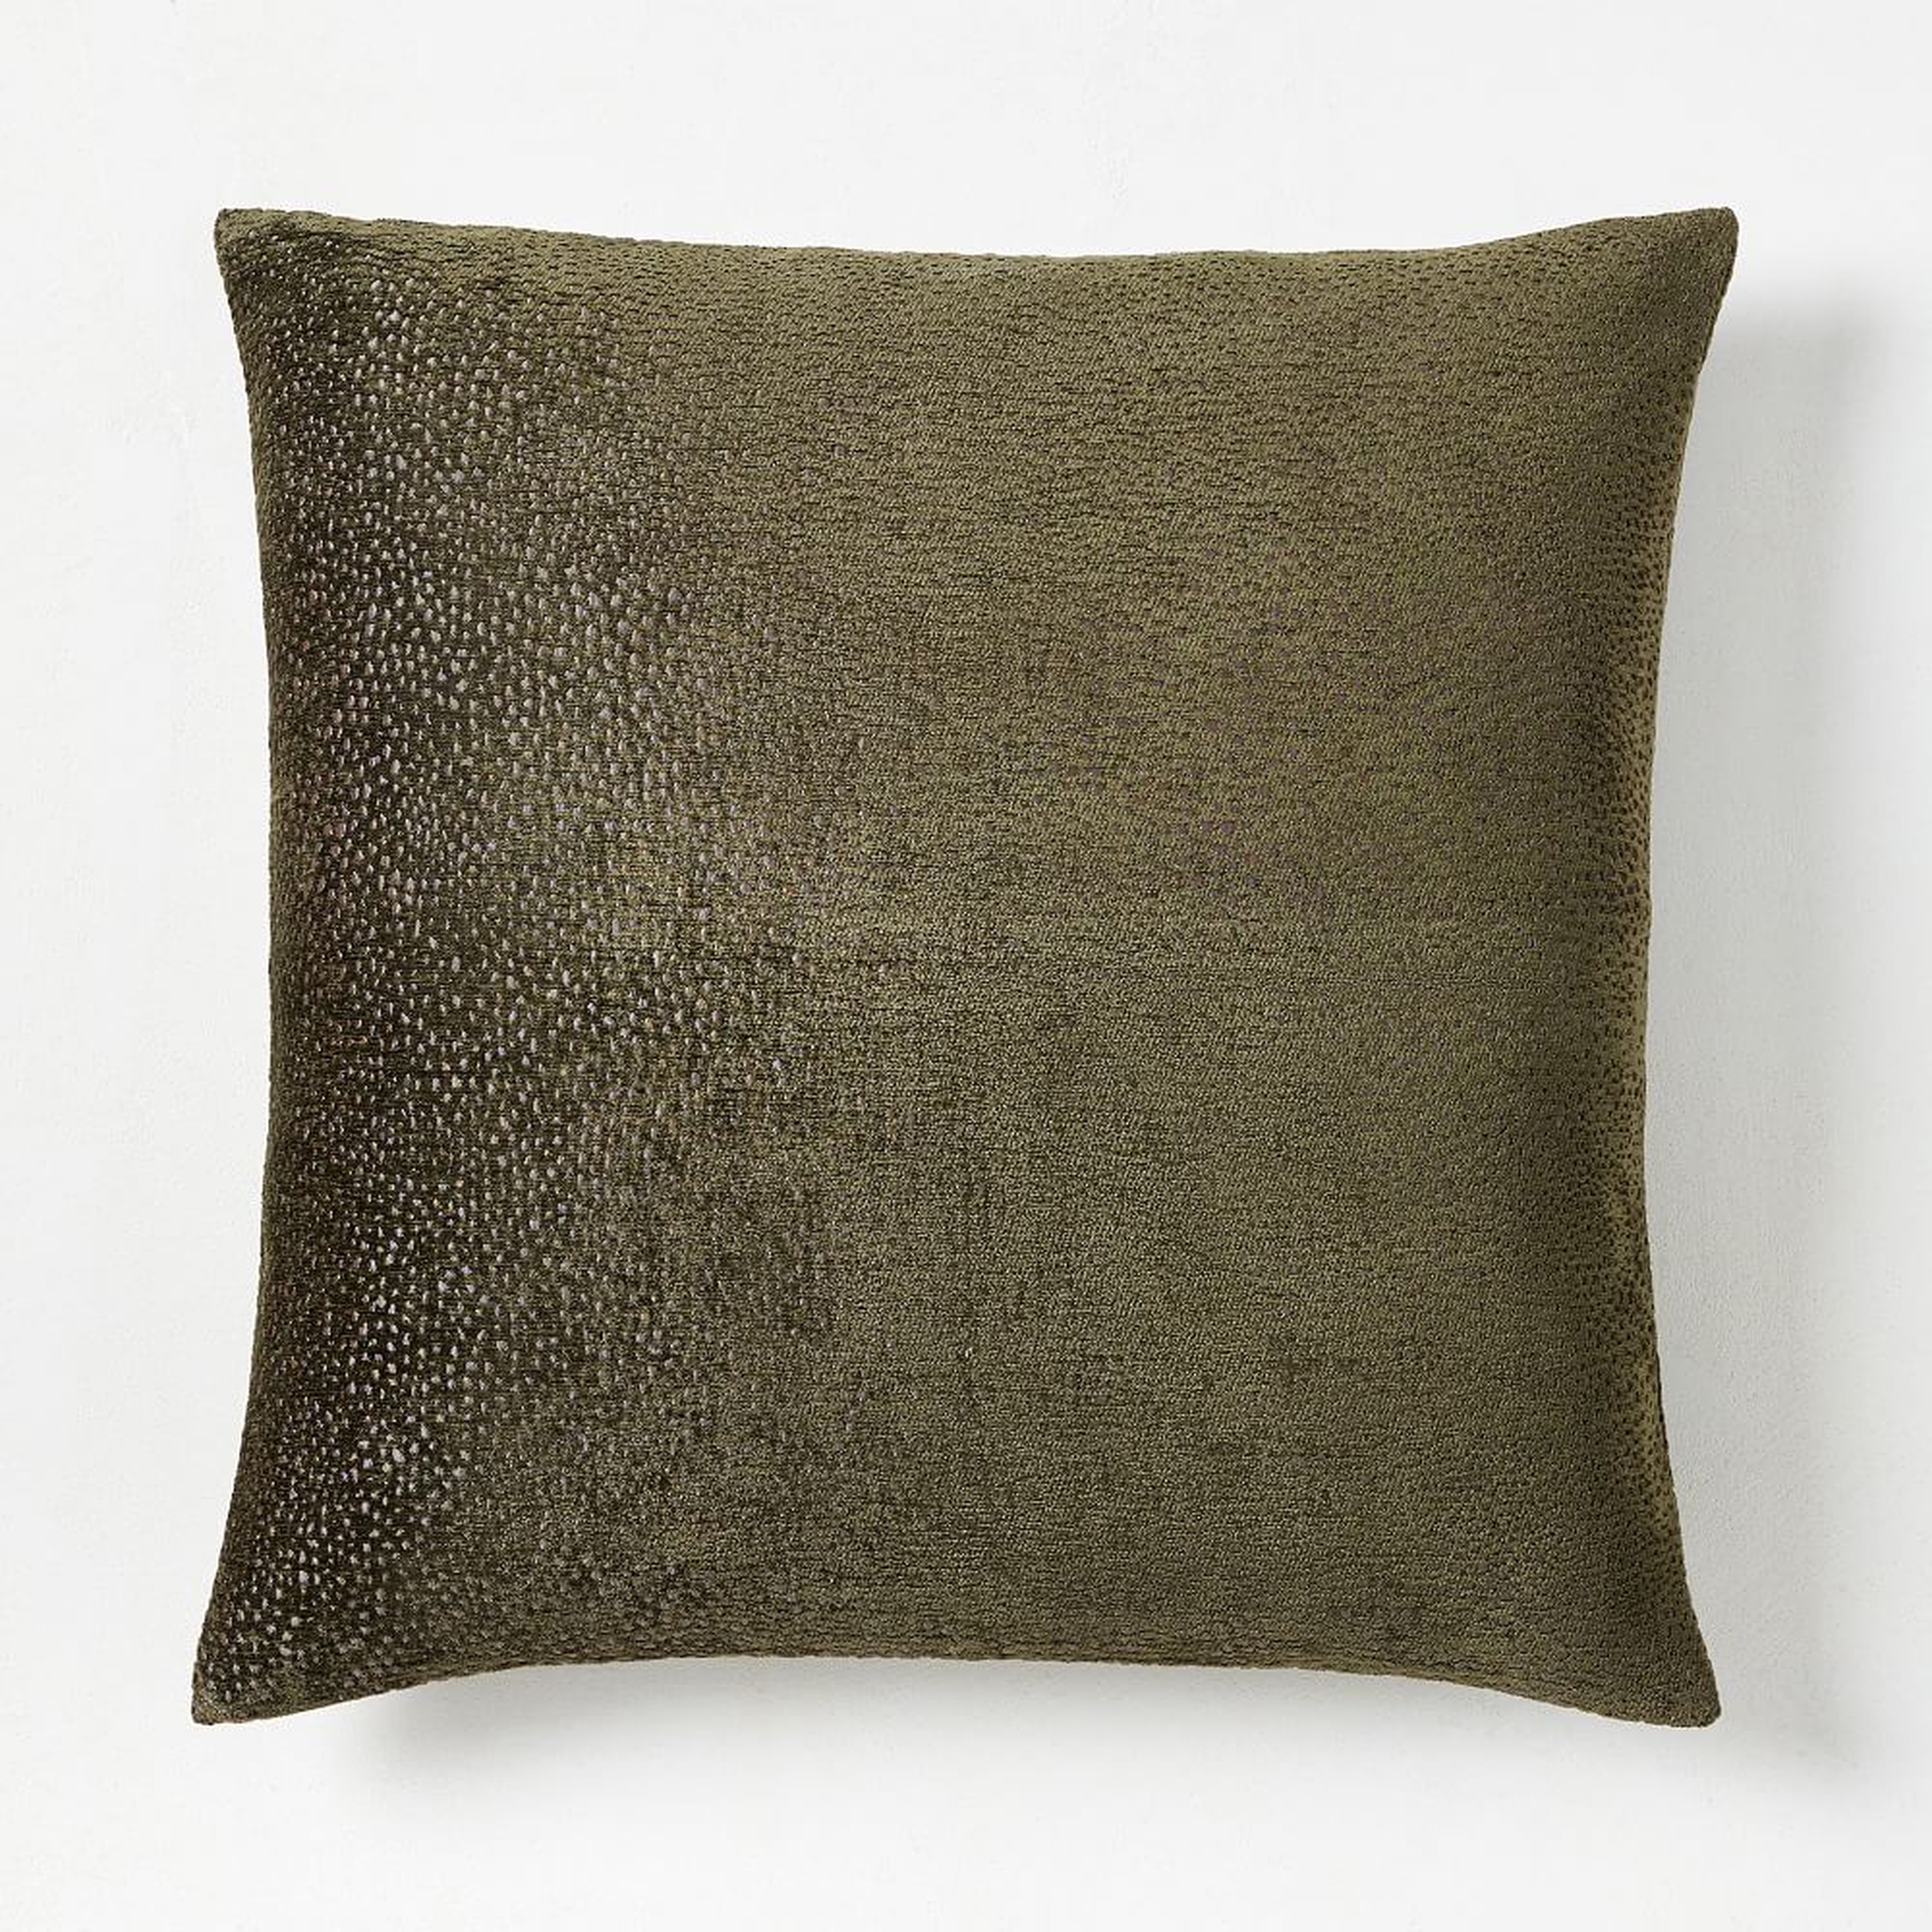 Dotted Chenille Jacquard Pillow Cover, 20"x20", Dark Olive - West Elm